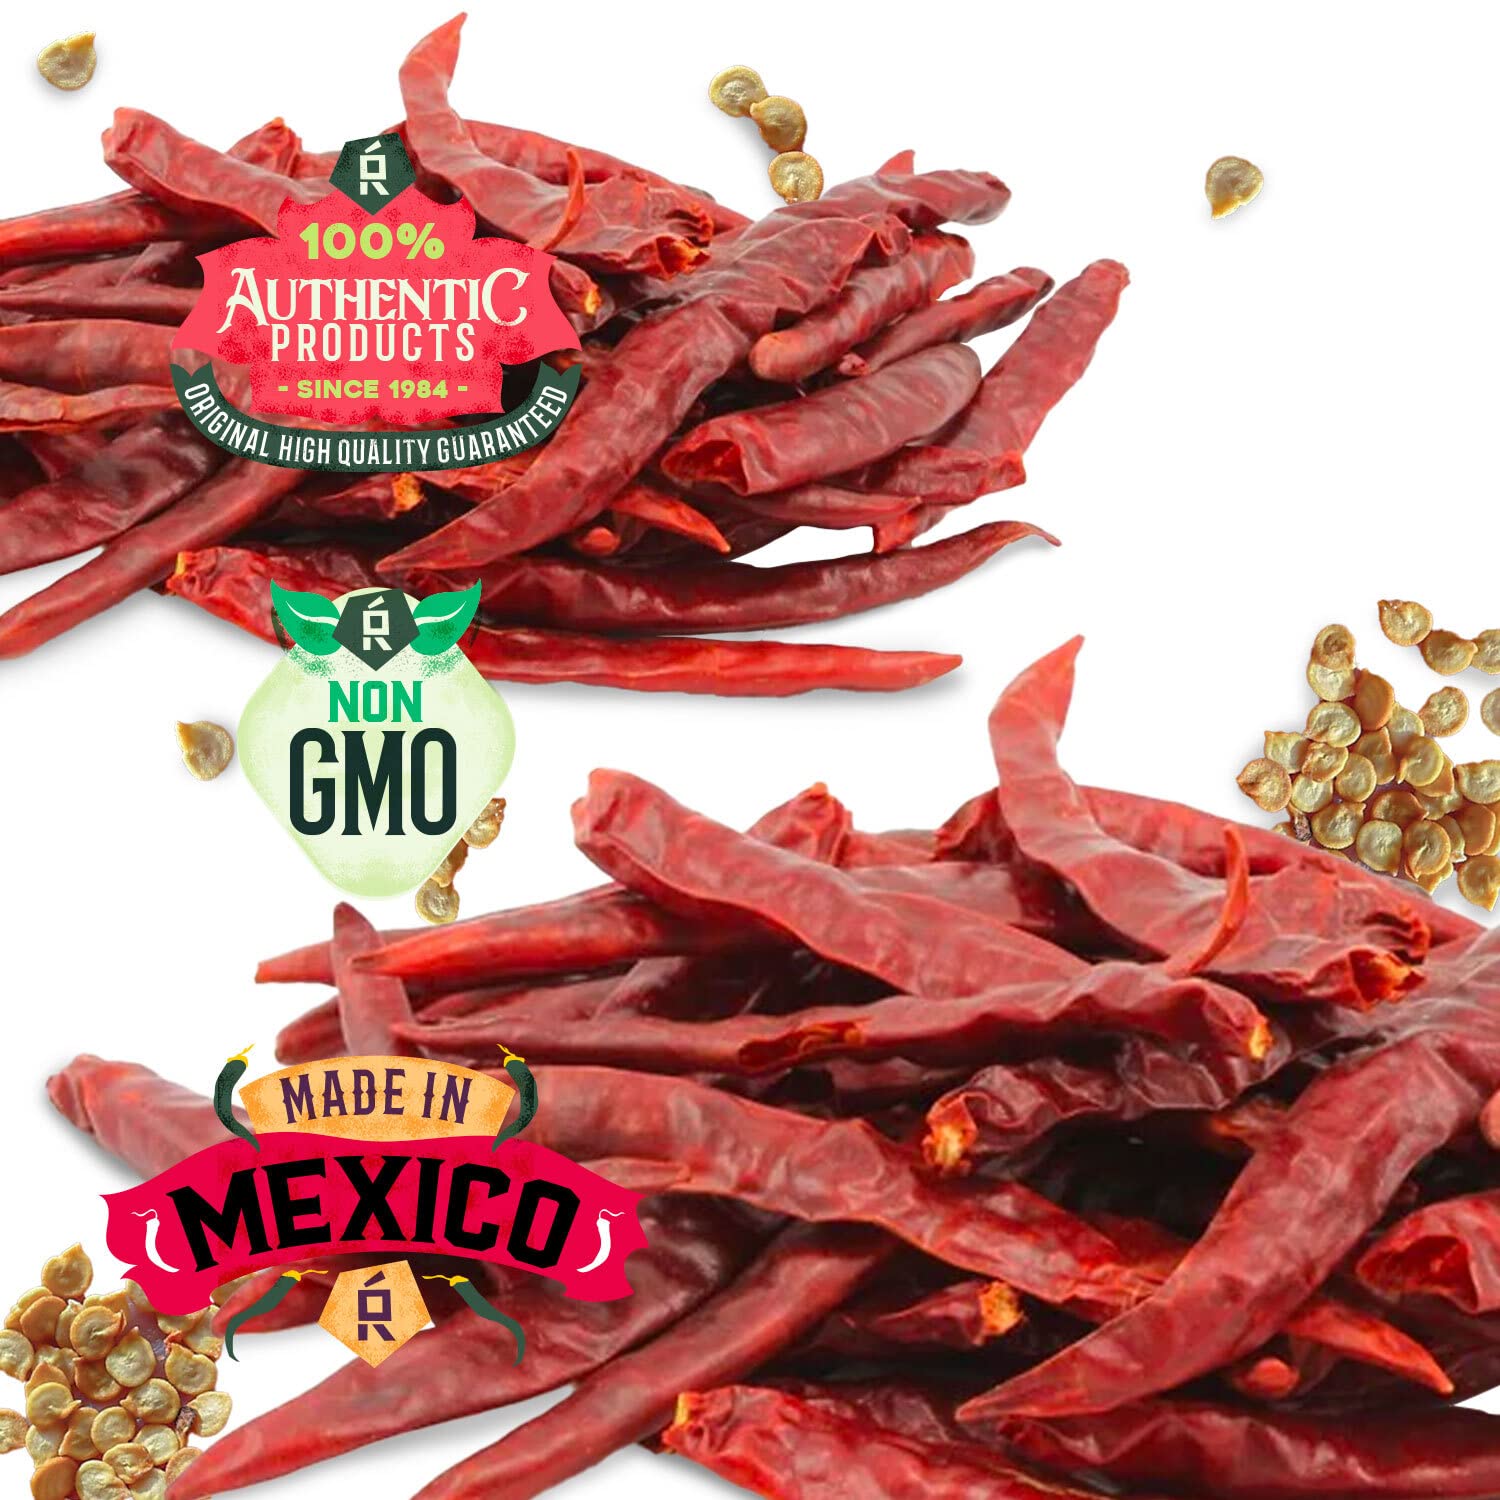 OLÉ RICO - Dried Chile Peppers 3 Pack Bundle (12 oz Total) - Ancho Chiles, Guajillo Chiles and Arbol Chiles - The Spicy Trio - Great For Mexican Recipes - Packaged In Resealable Bags - image 4 of 9